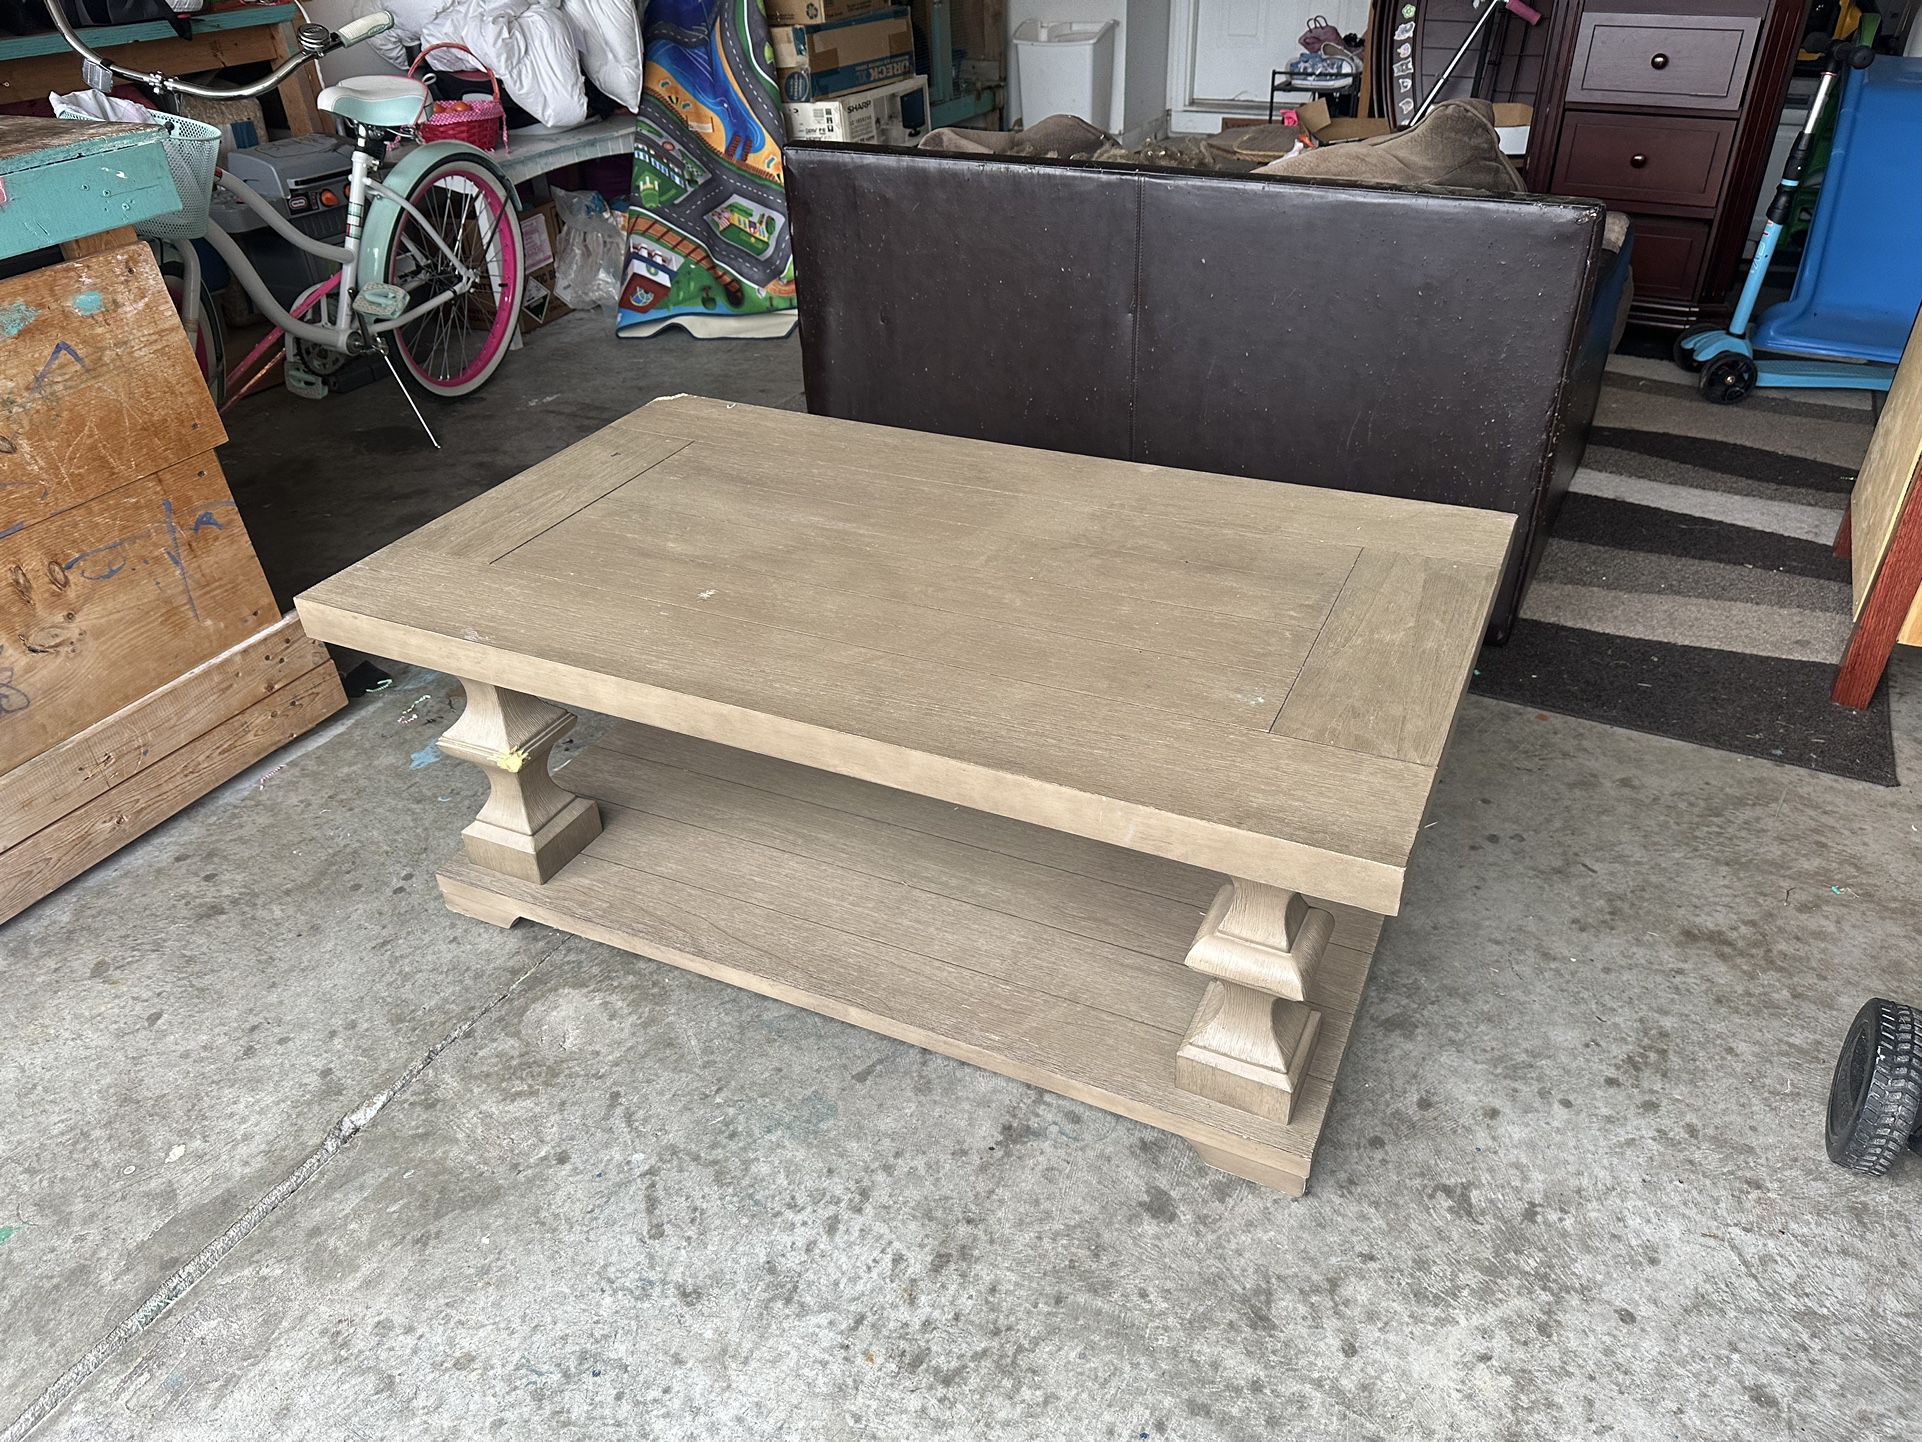 Coffee Table With Wheels